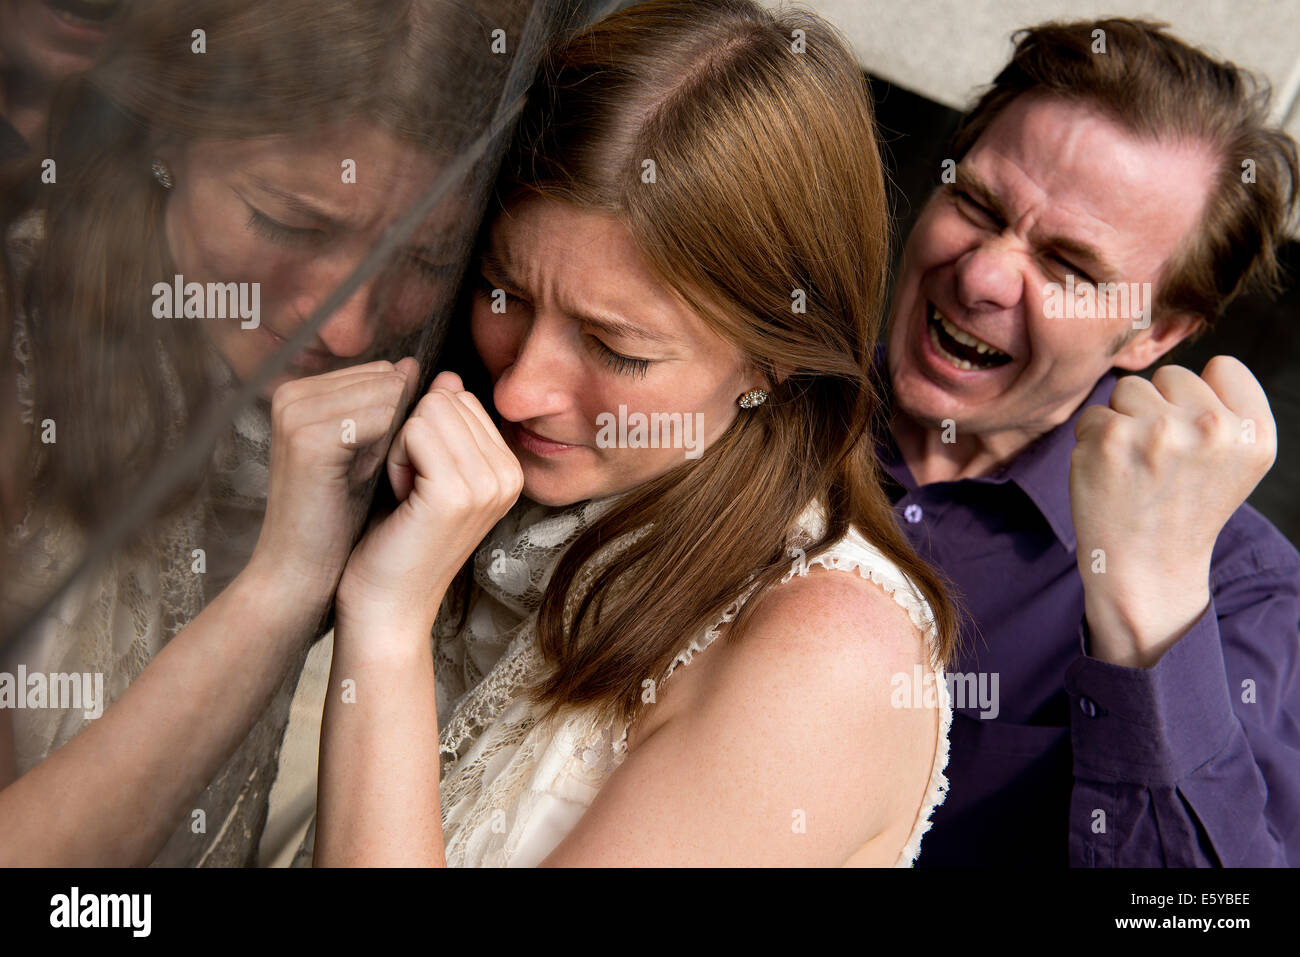 Aggressive man lashing out on a frightened woman with tirade of verbal abuse and threatening behaviour. Stock Photo